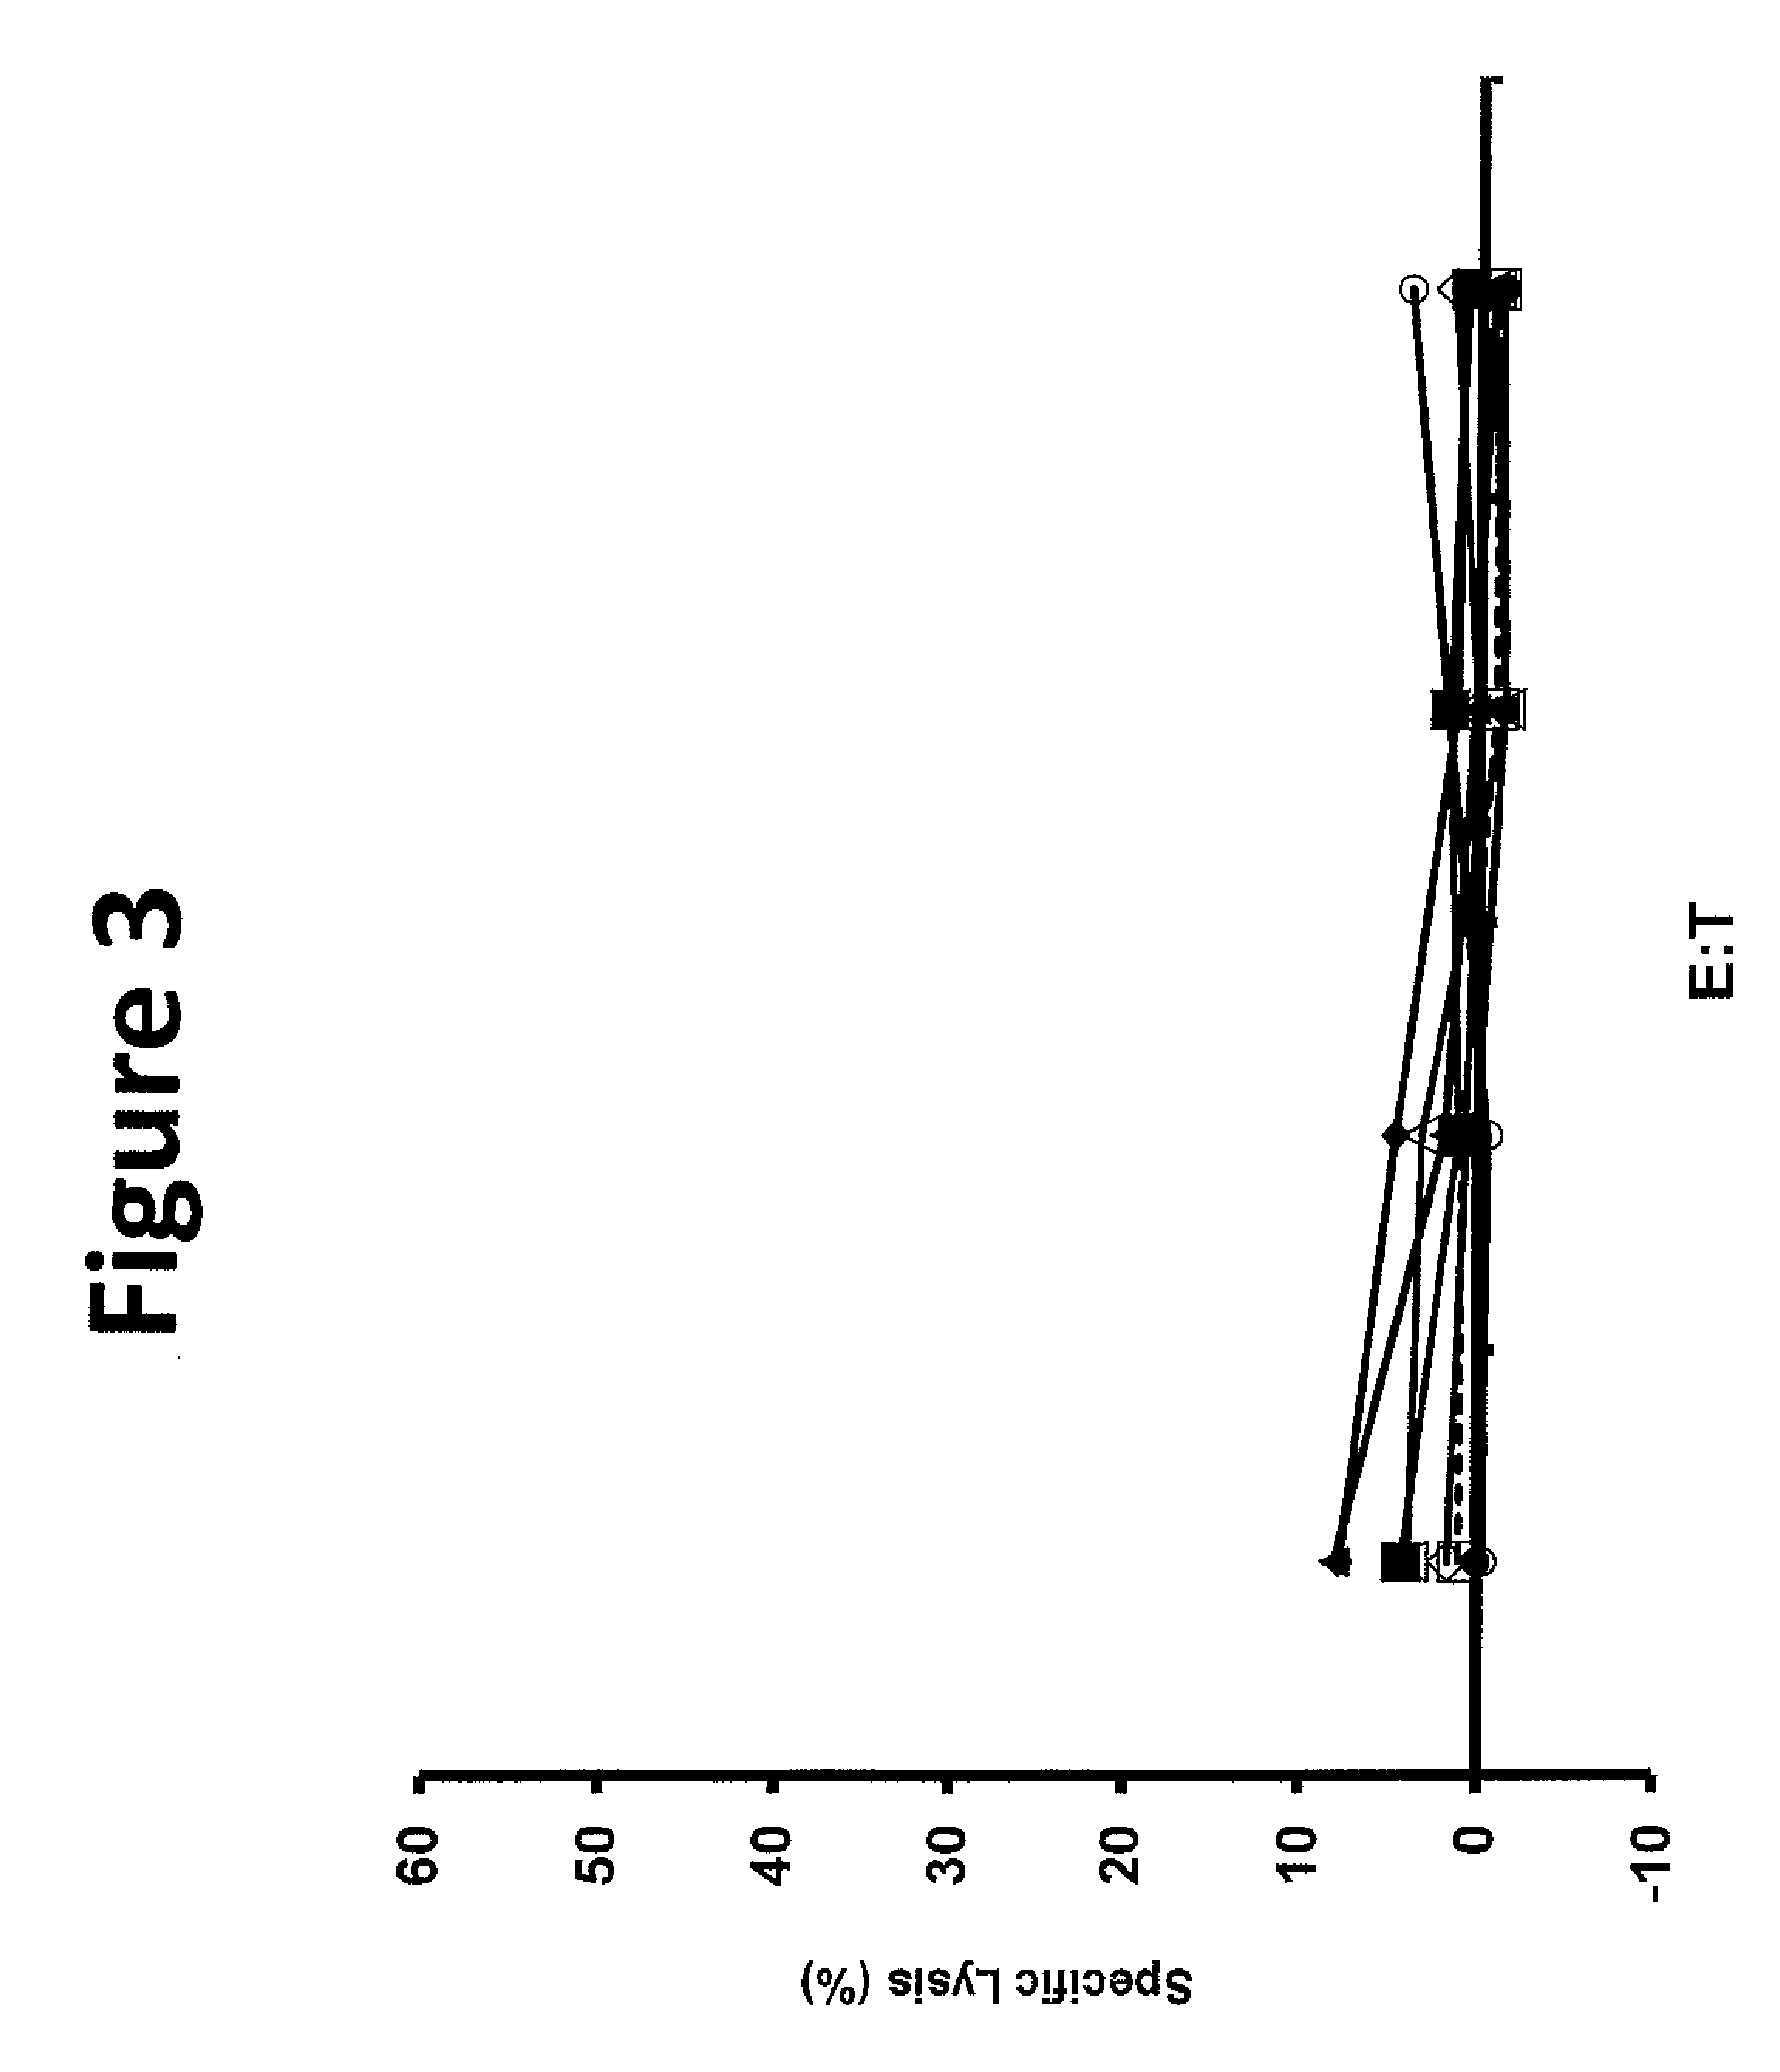 T cell receptors and related materials and methods of use